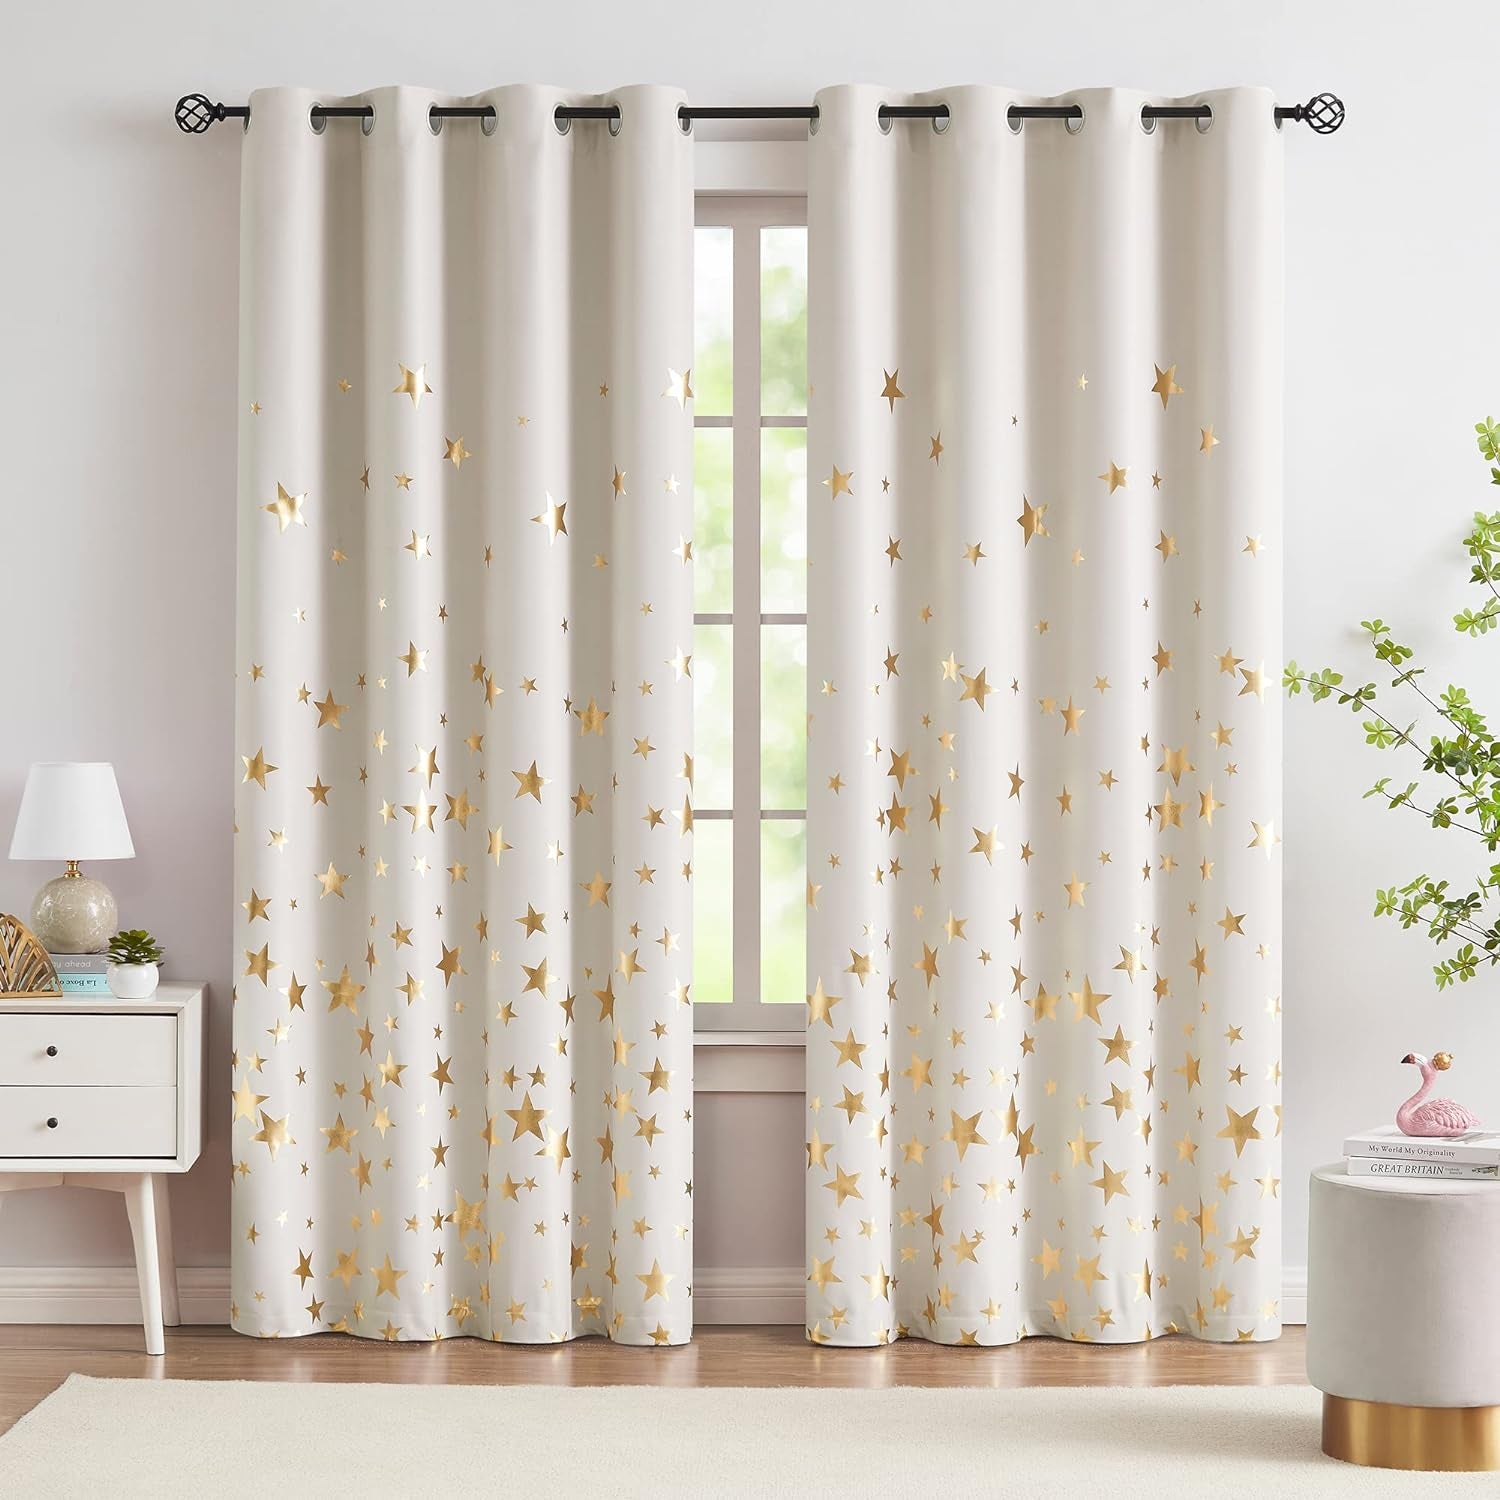 Pink Full Blackout Curtains for Girl'S Room Gold Metallic Medallion Curtain Drapes for Studio Dorm Modern Sparking Thermal Window Curtains for Bedroom Living Room 63Inch 2 Panels Grommet Top  Treatmentex   